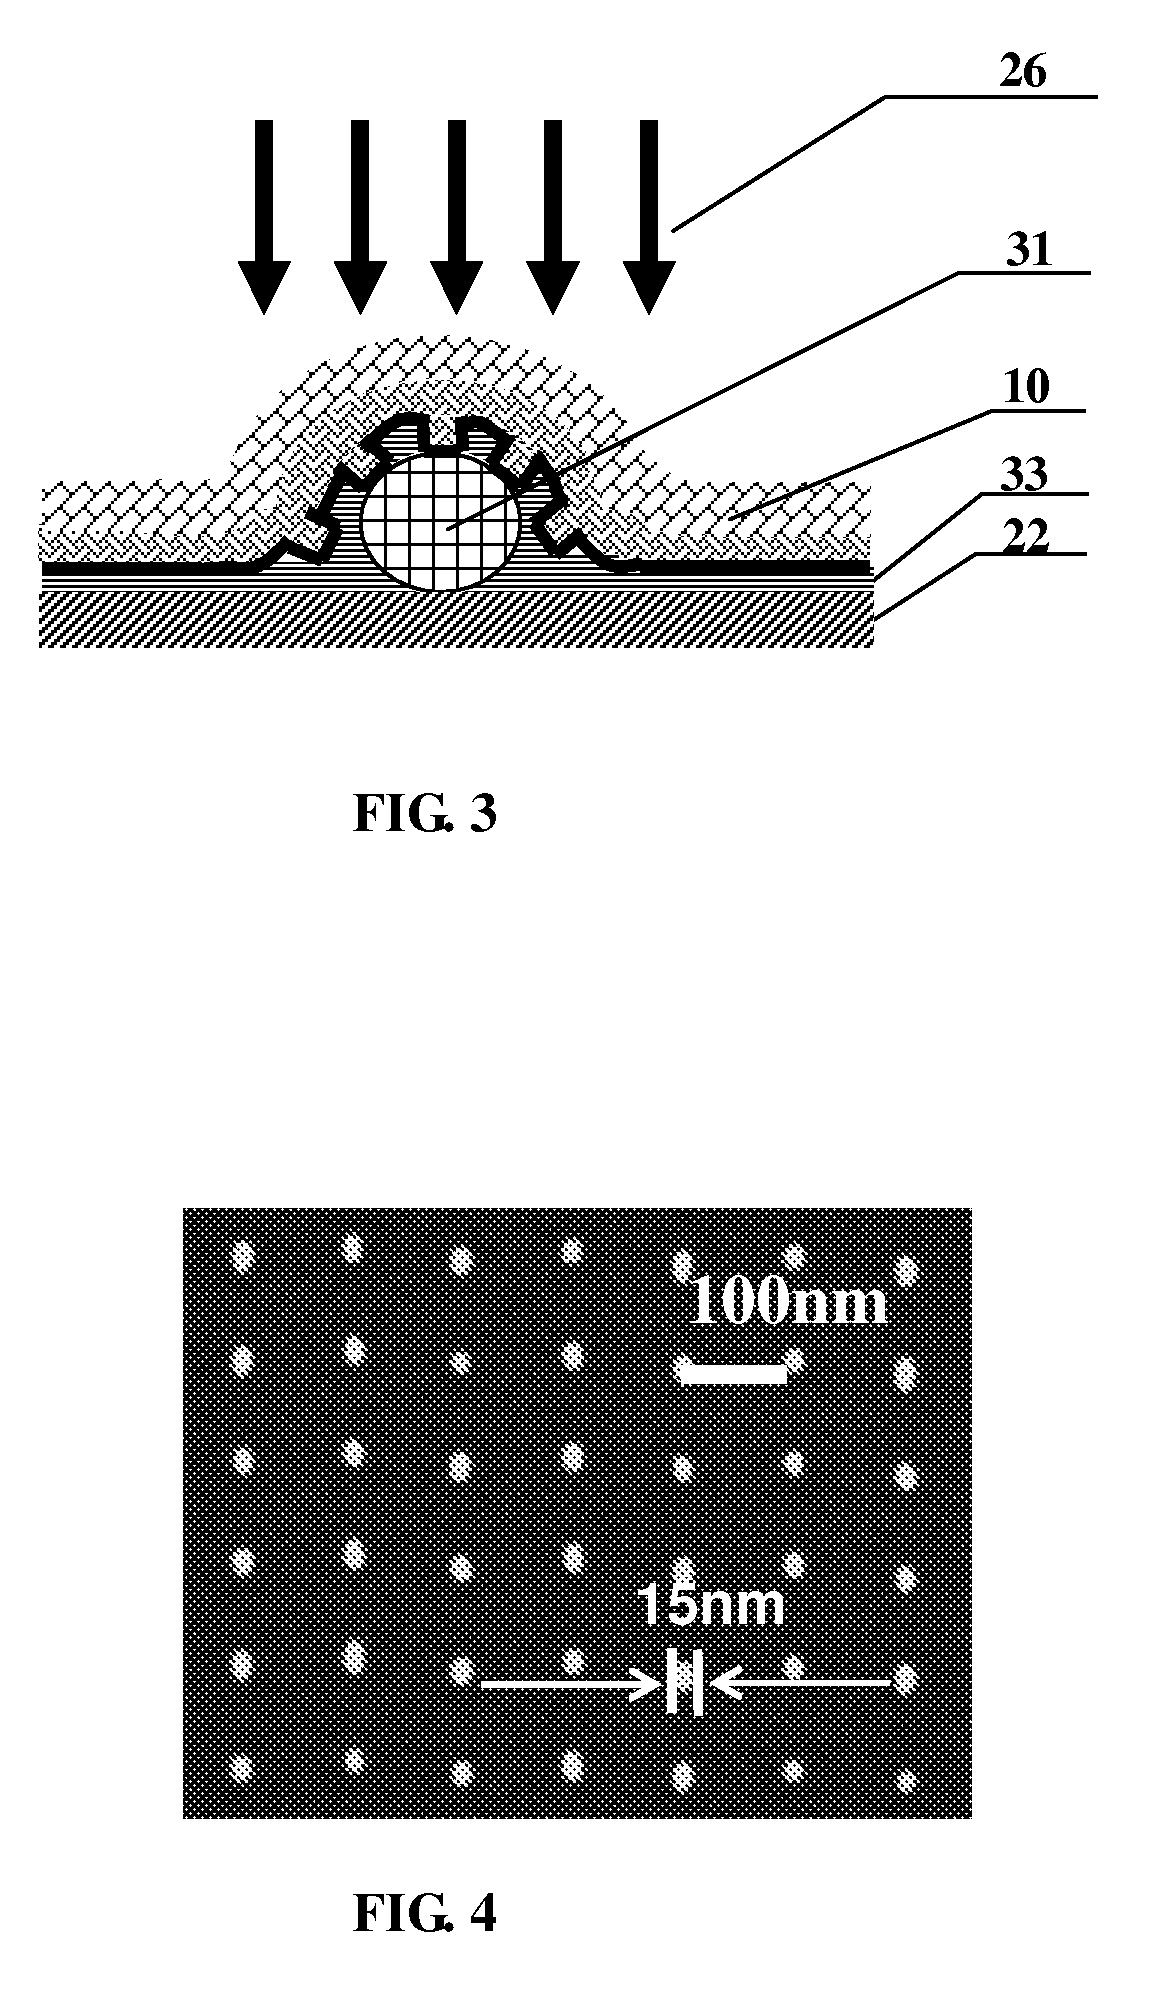 Flexible nanoimprint mold, method for fabricating the same, and mold usage on planar and curved substrate